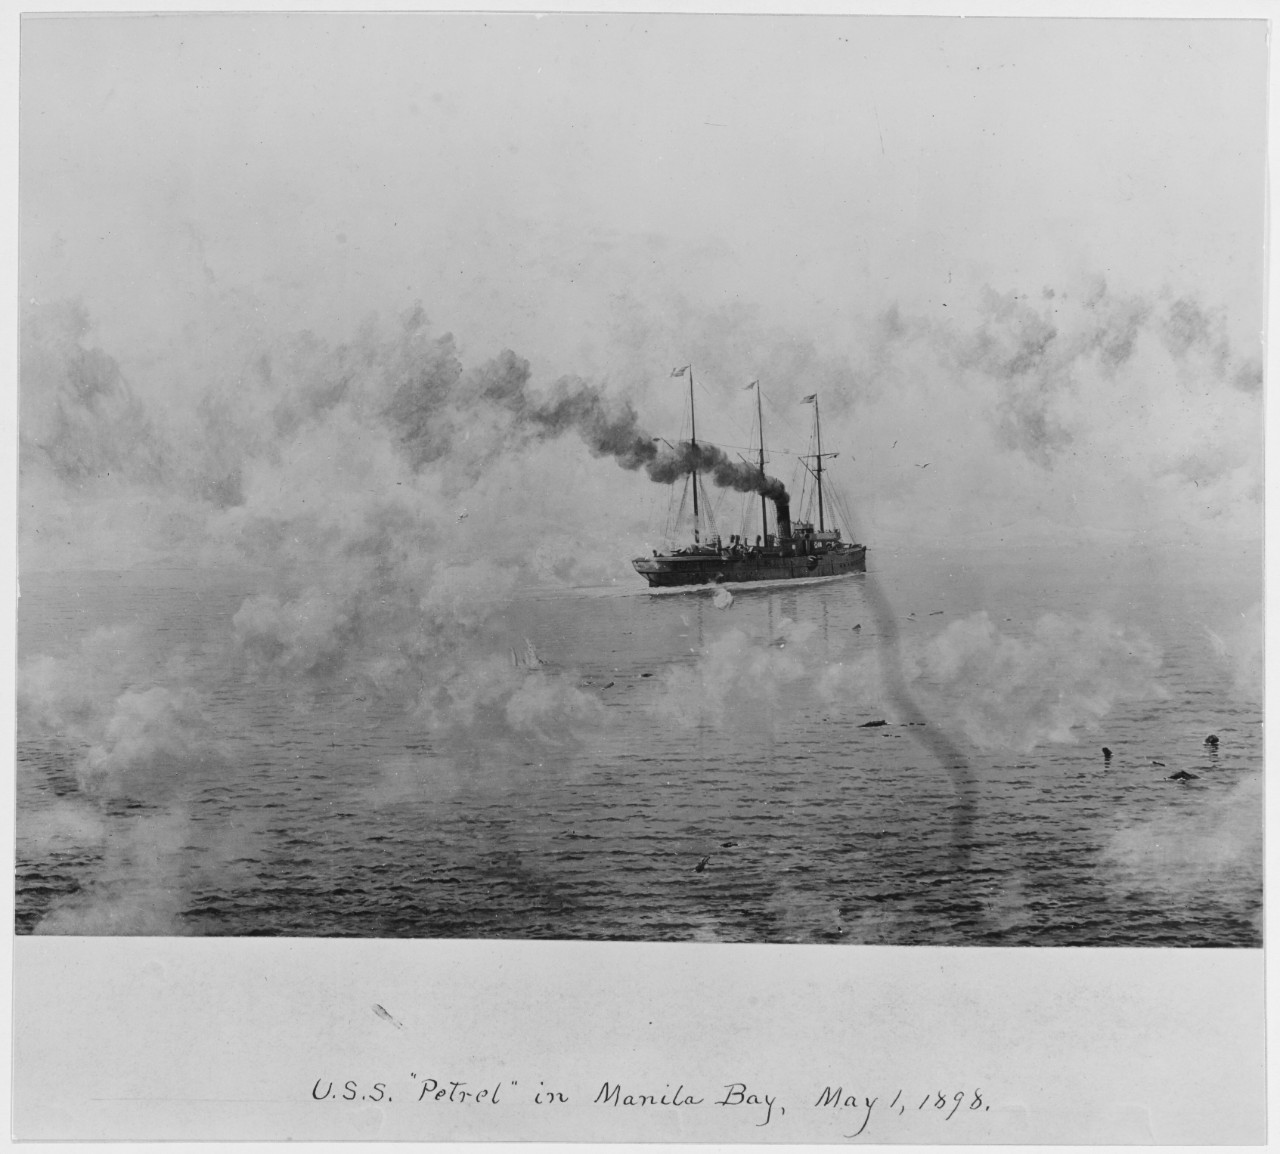 USS CONCORD in Manila Bay, May 1, 1898